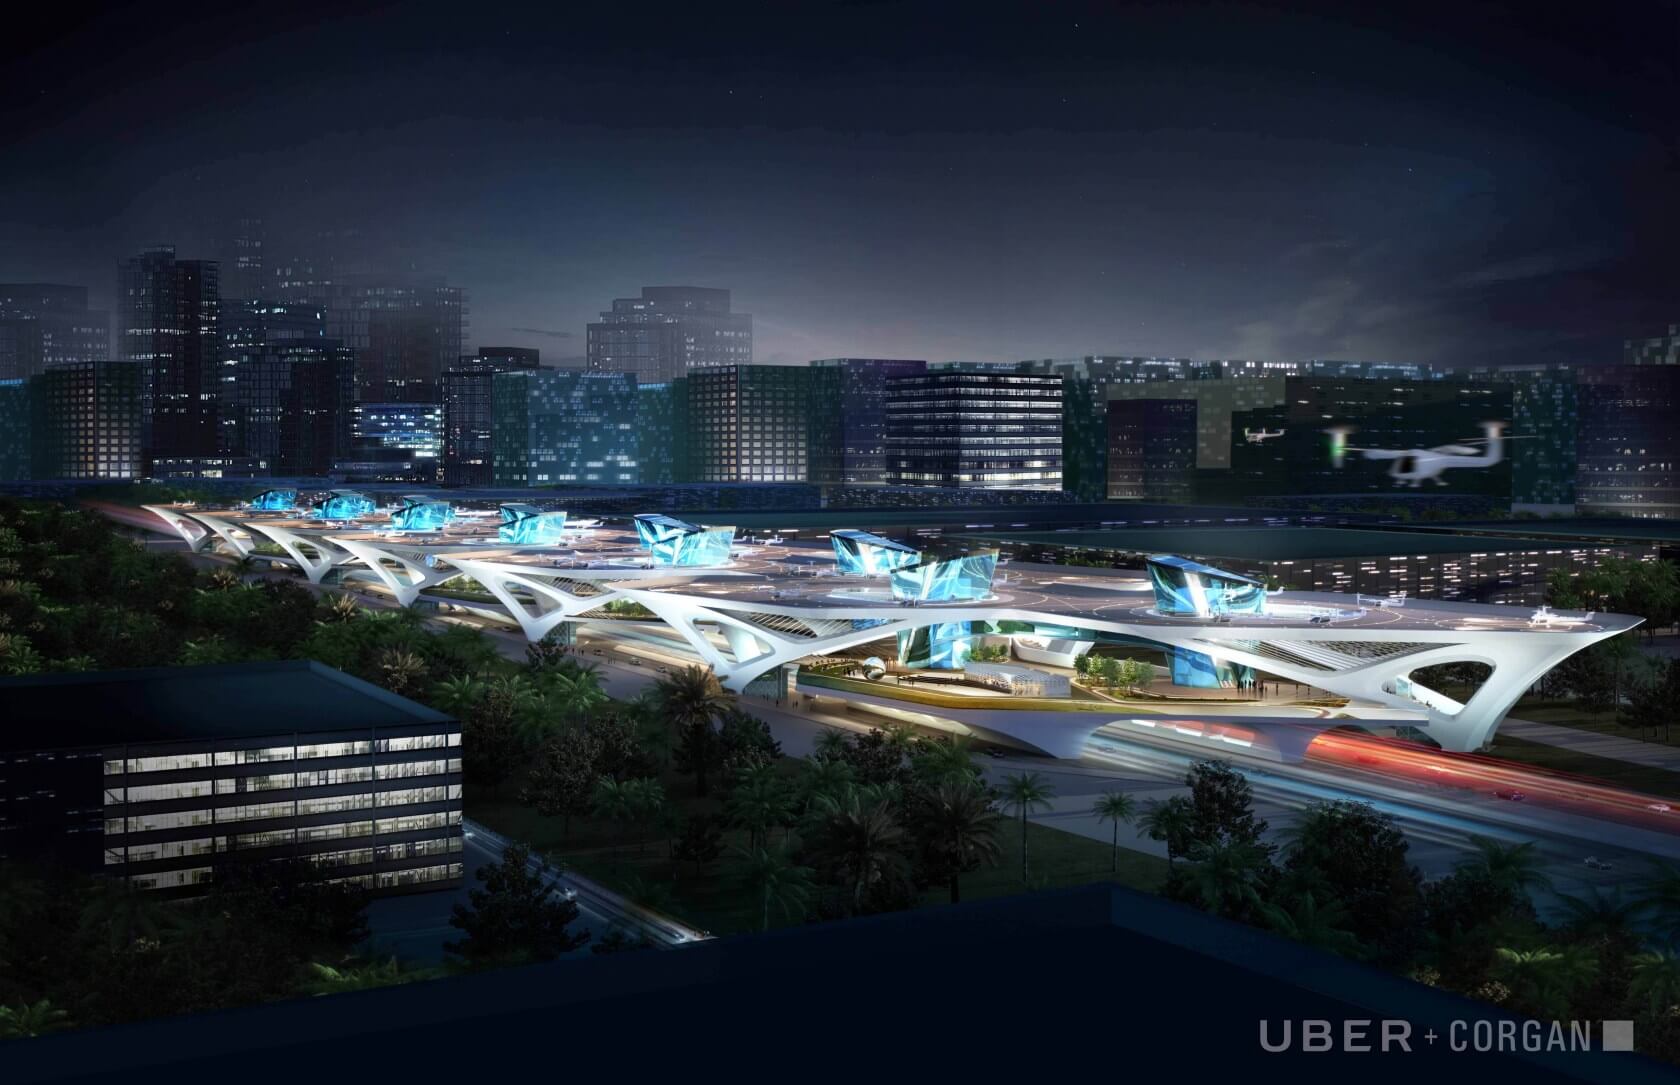 Uber 'Skyport' concepts unveiled at Elevate Summit